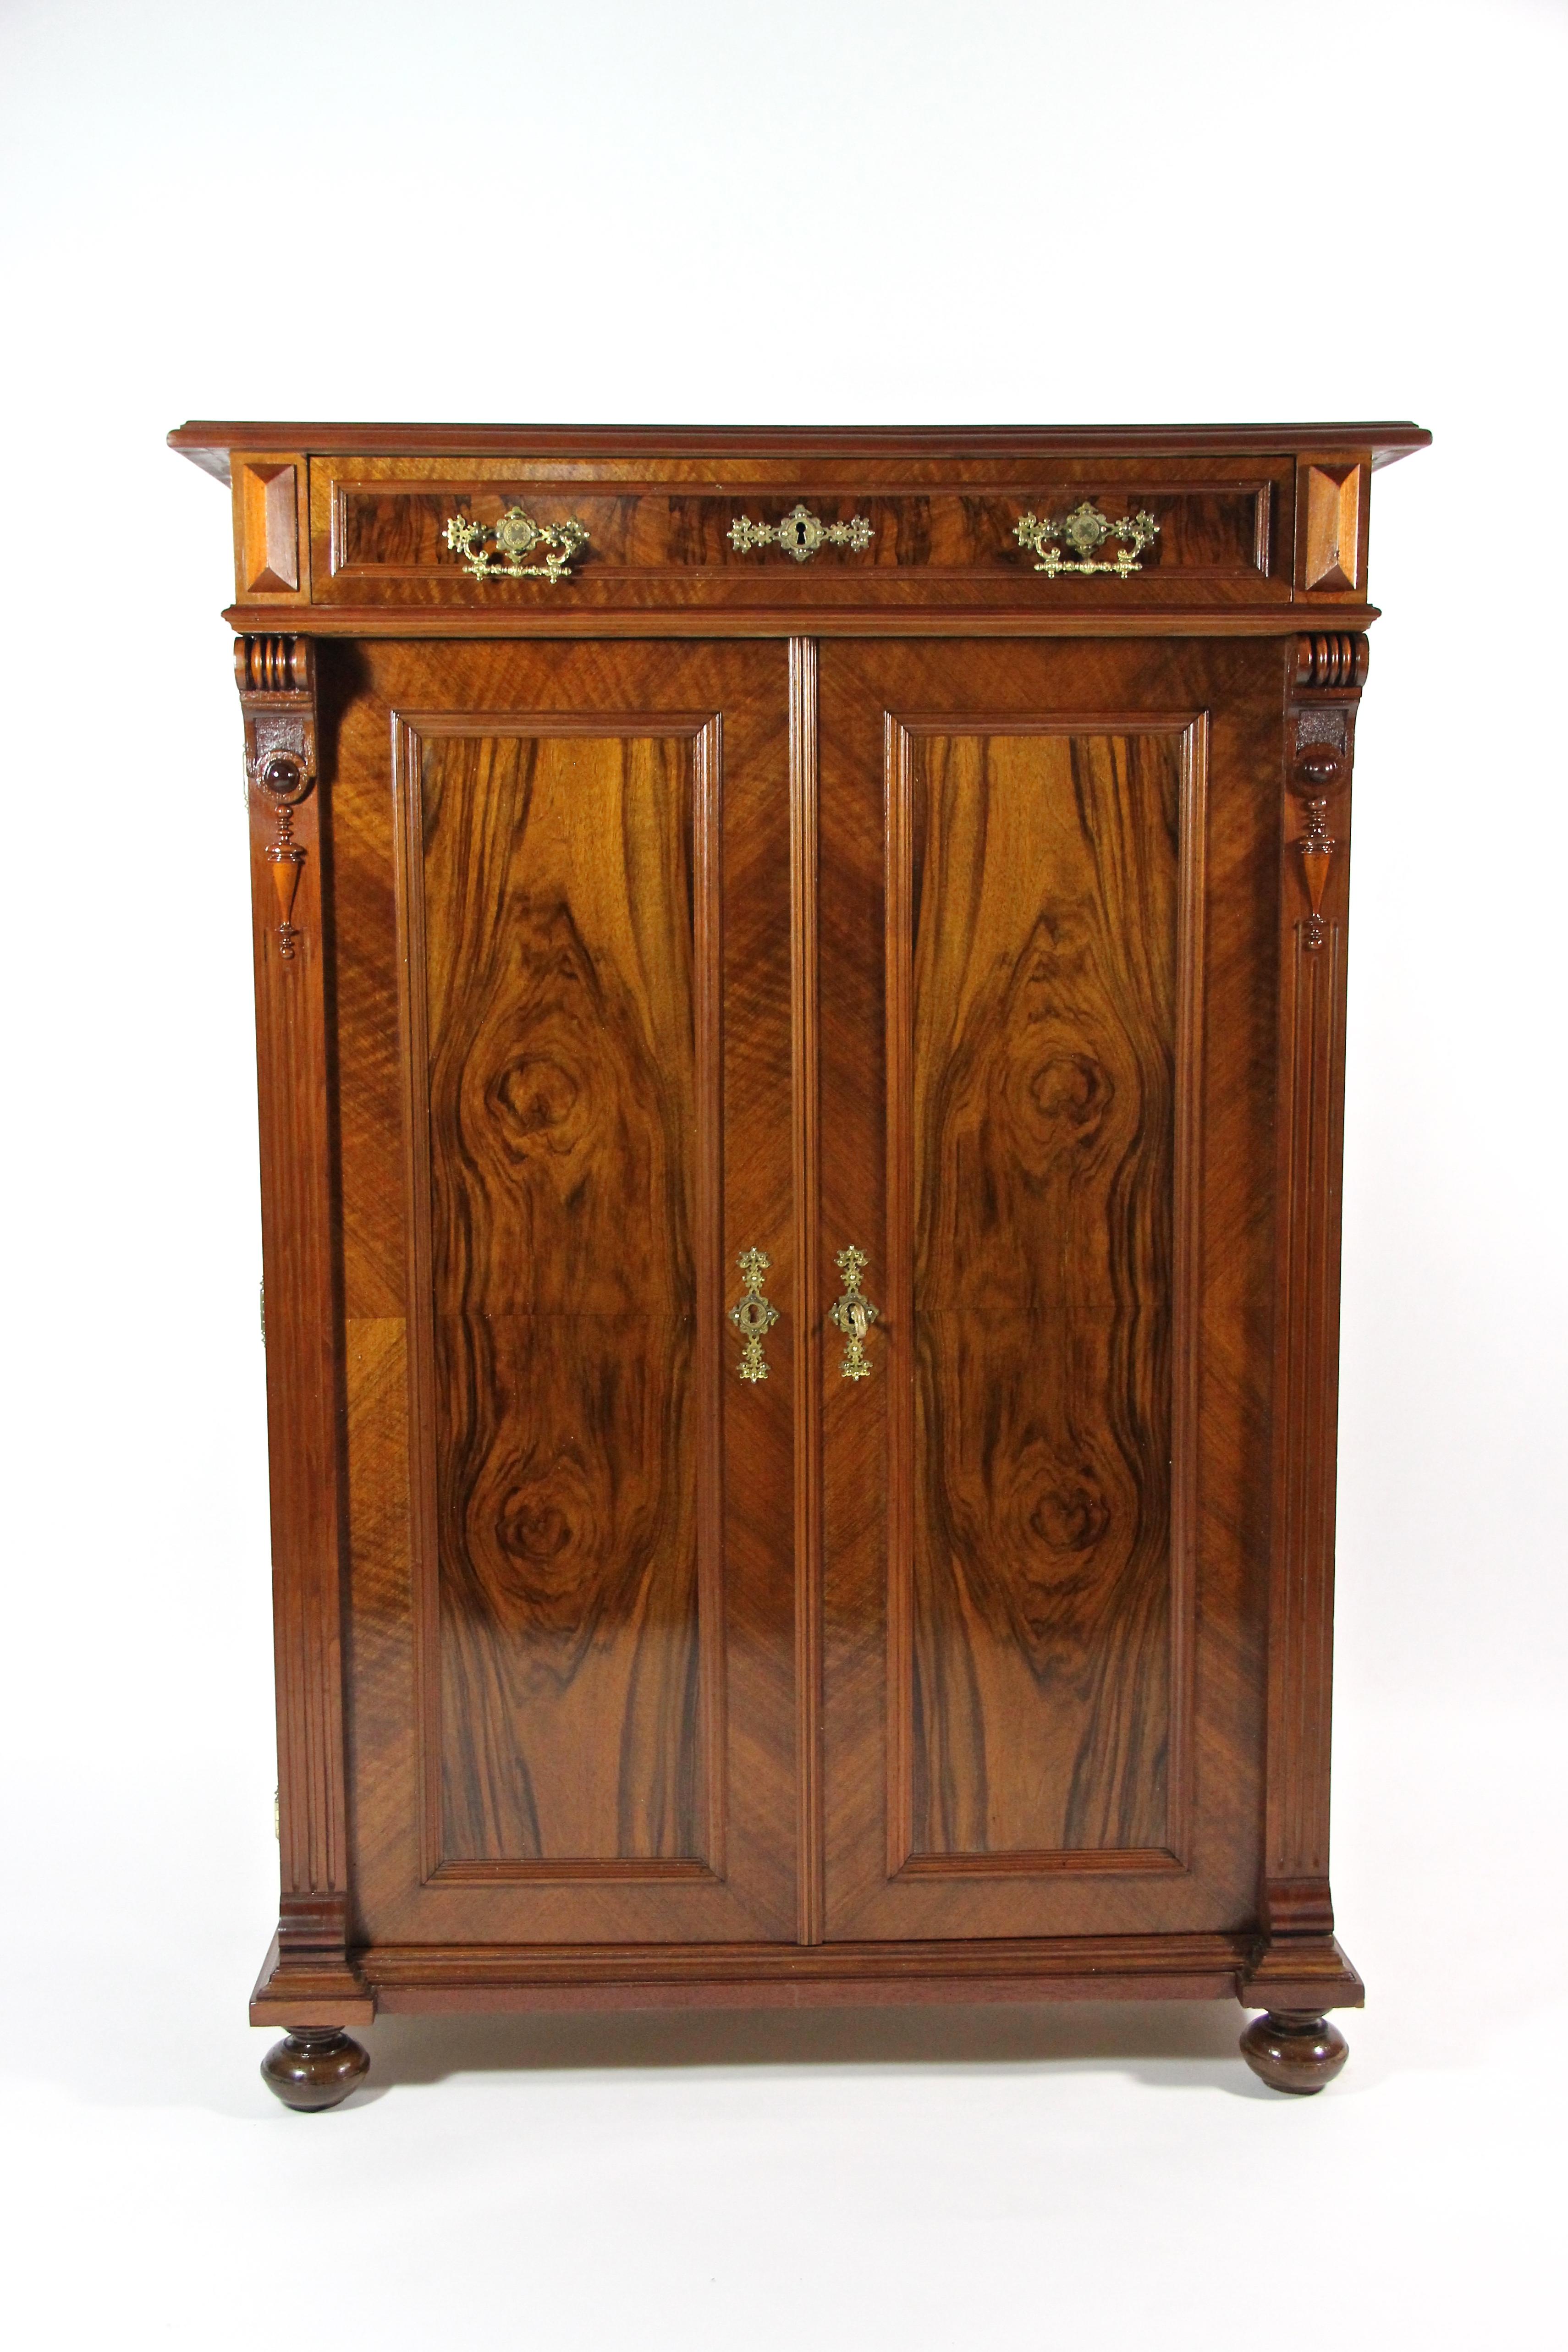 Perfectly restored 19th century nut wood cabinet/ vertiko from the so called 